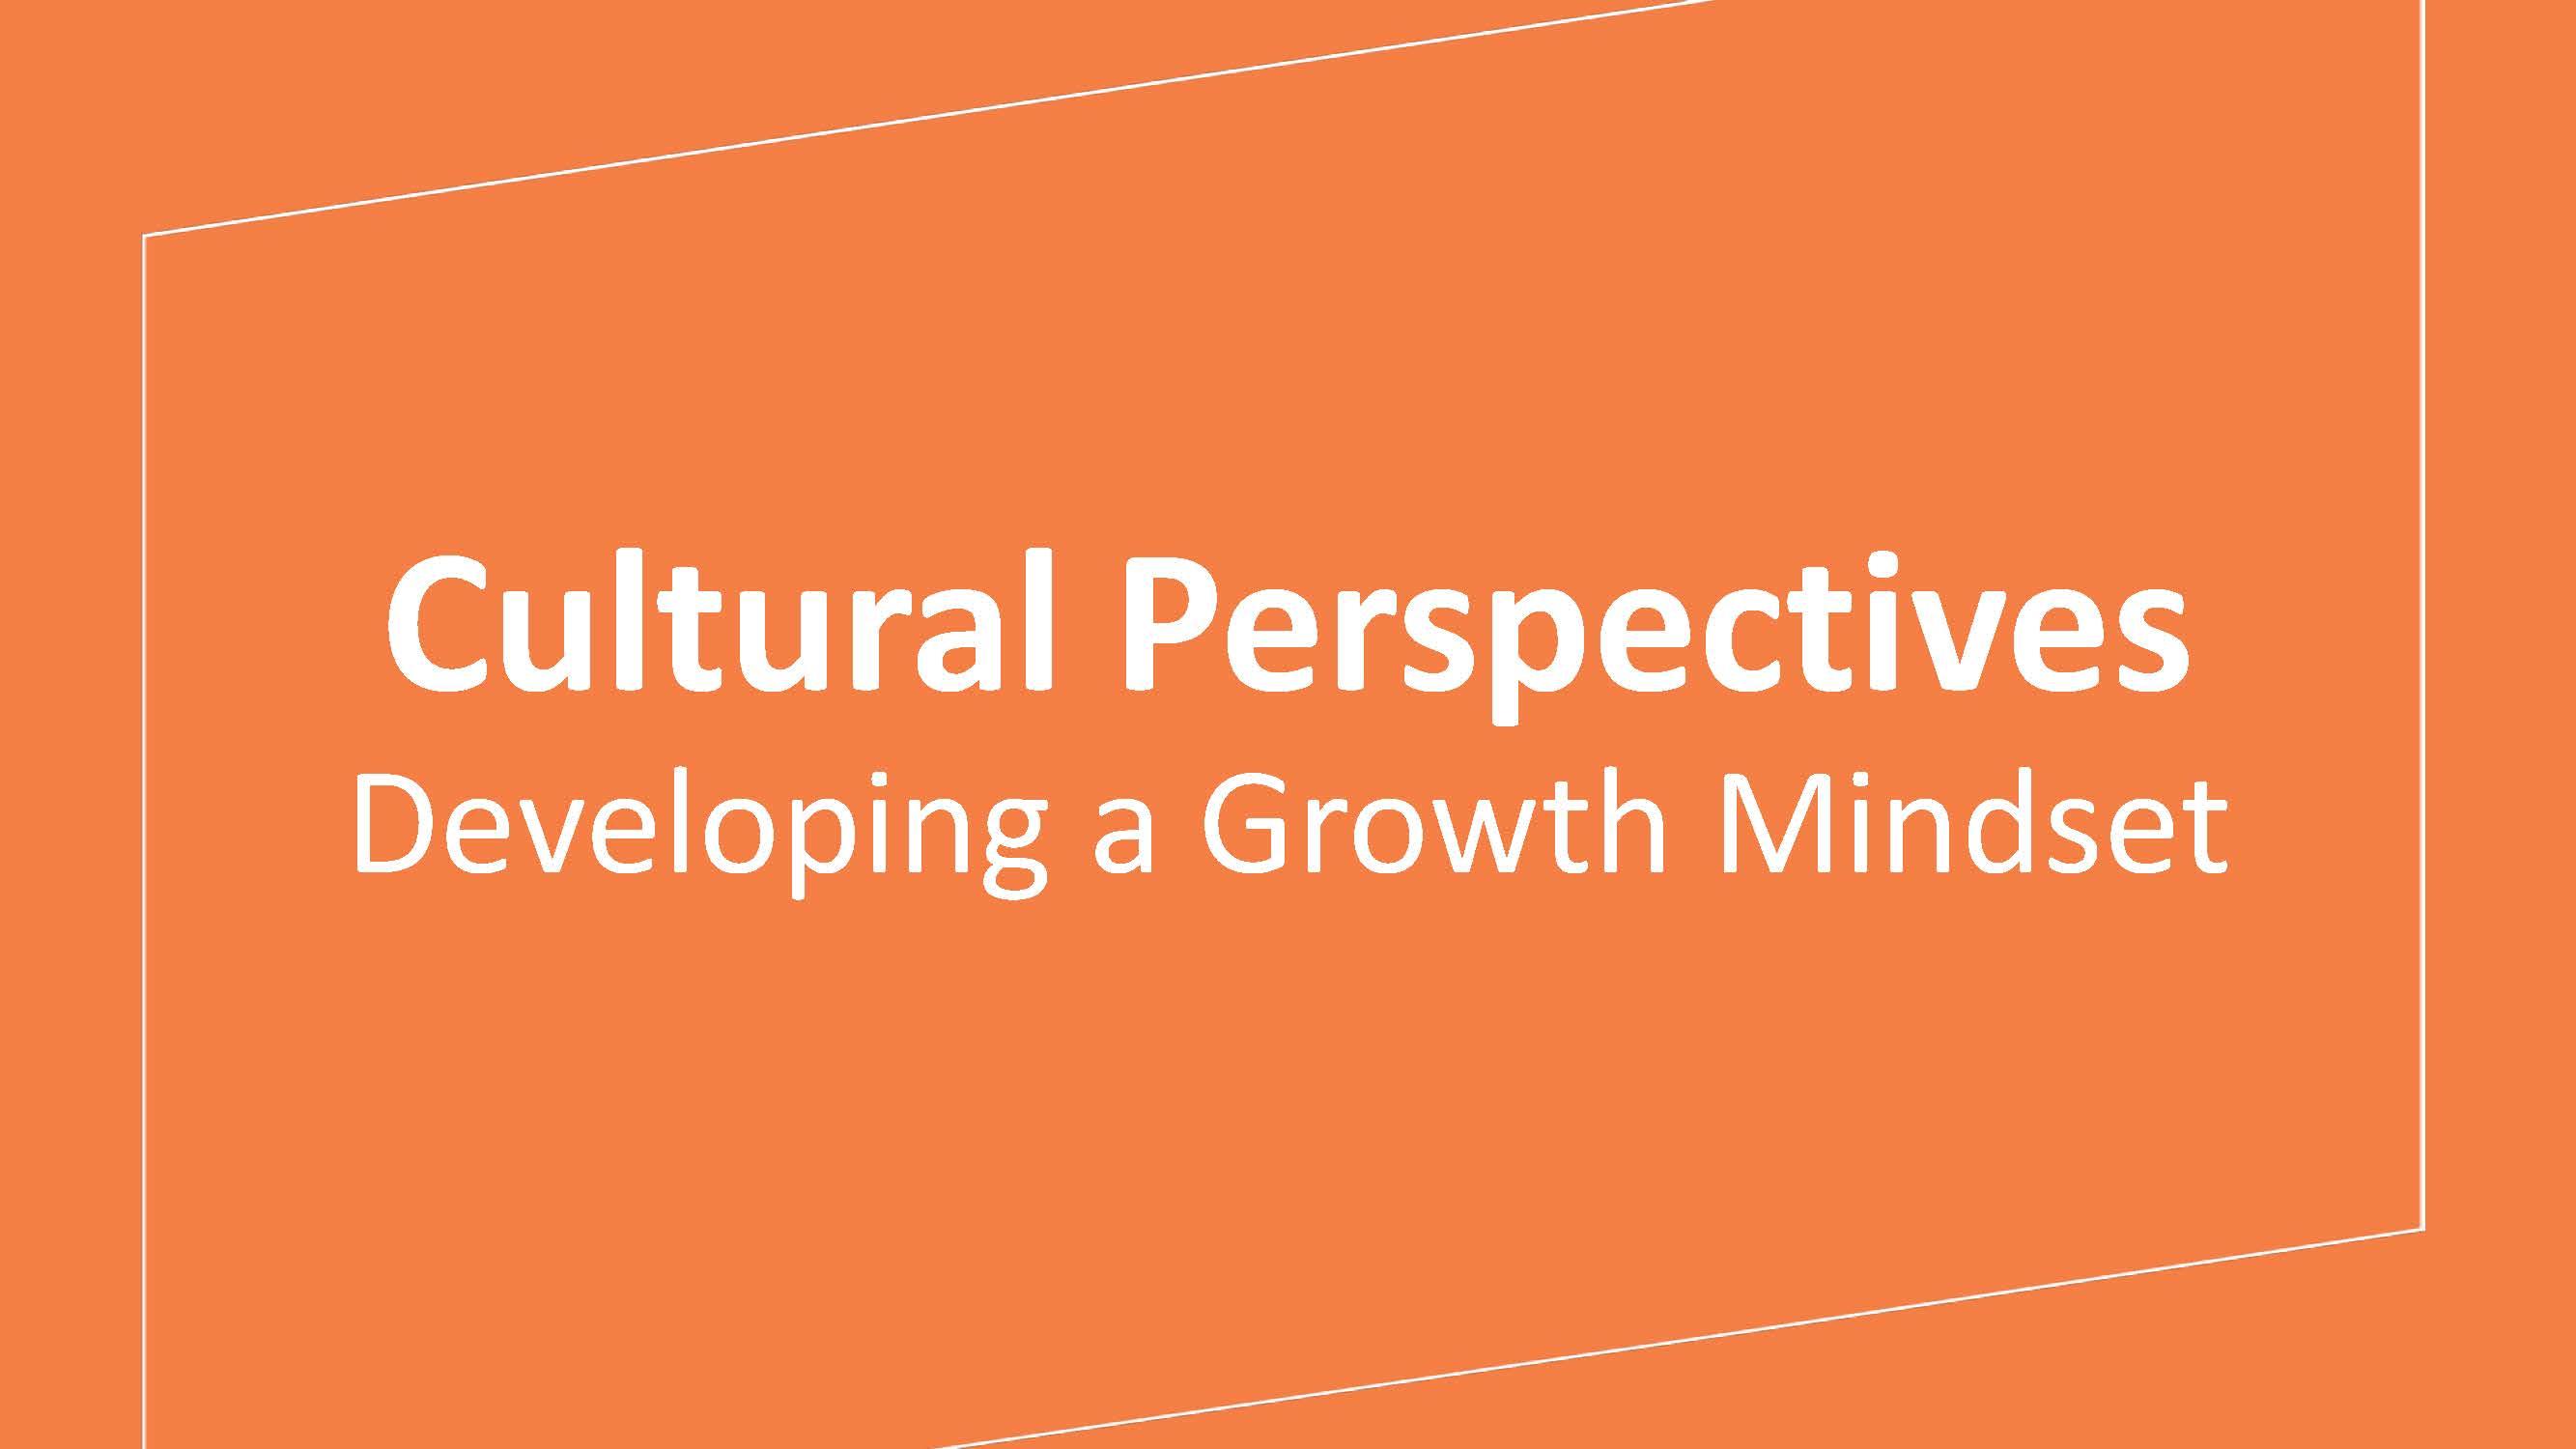 Cultural Perspectives: Developing a Growth Mindset